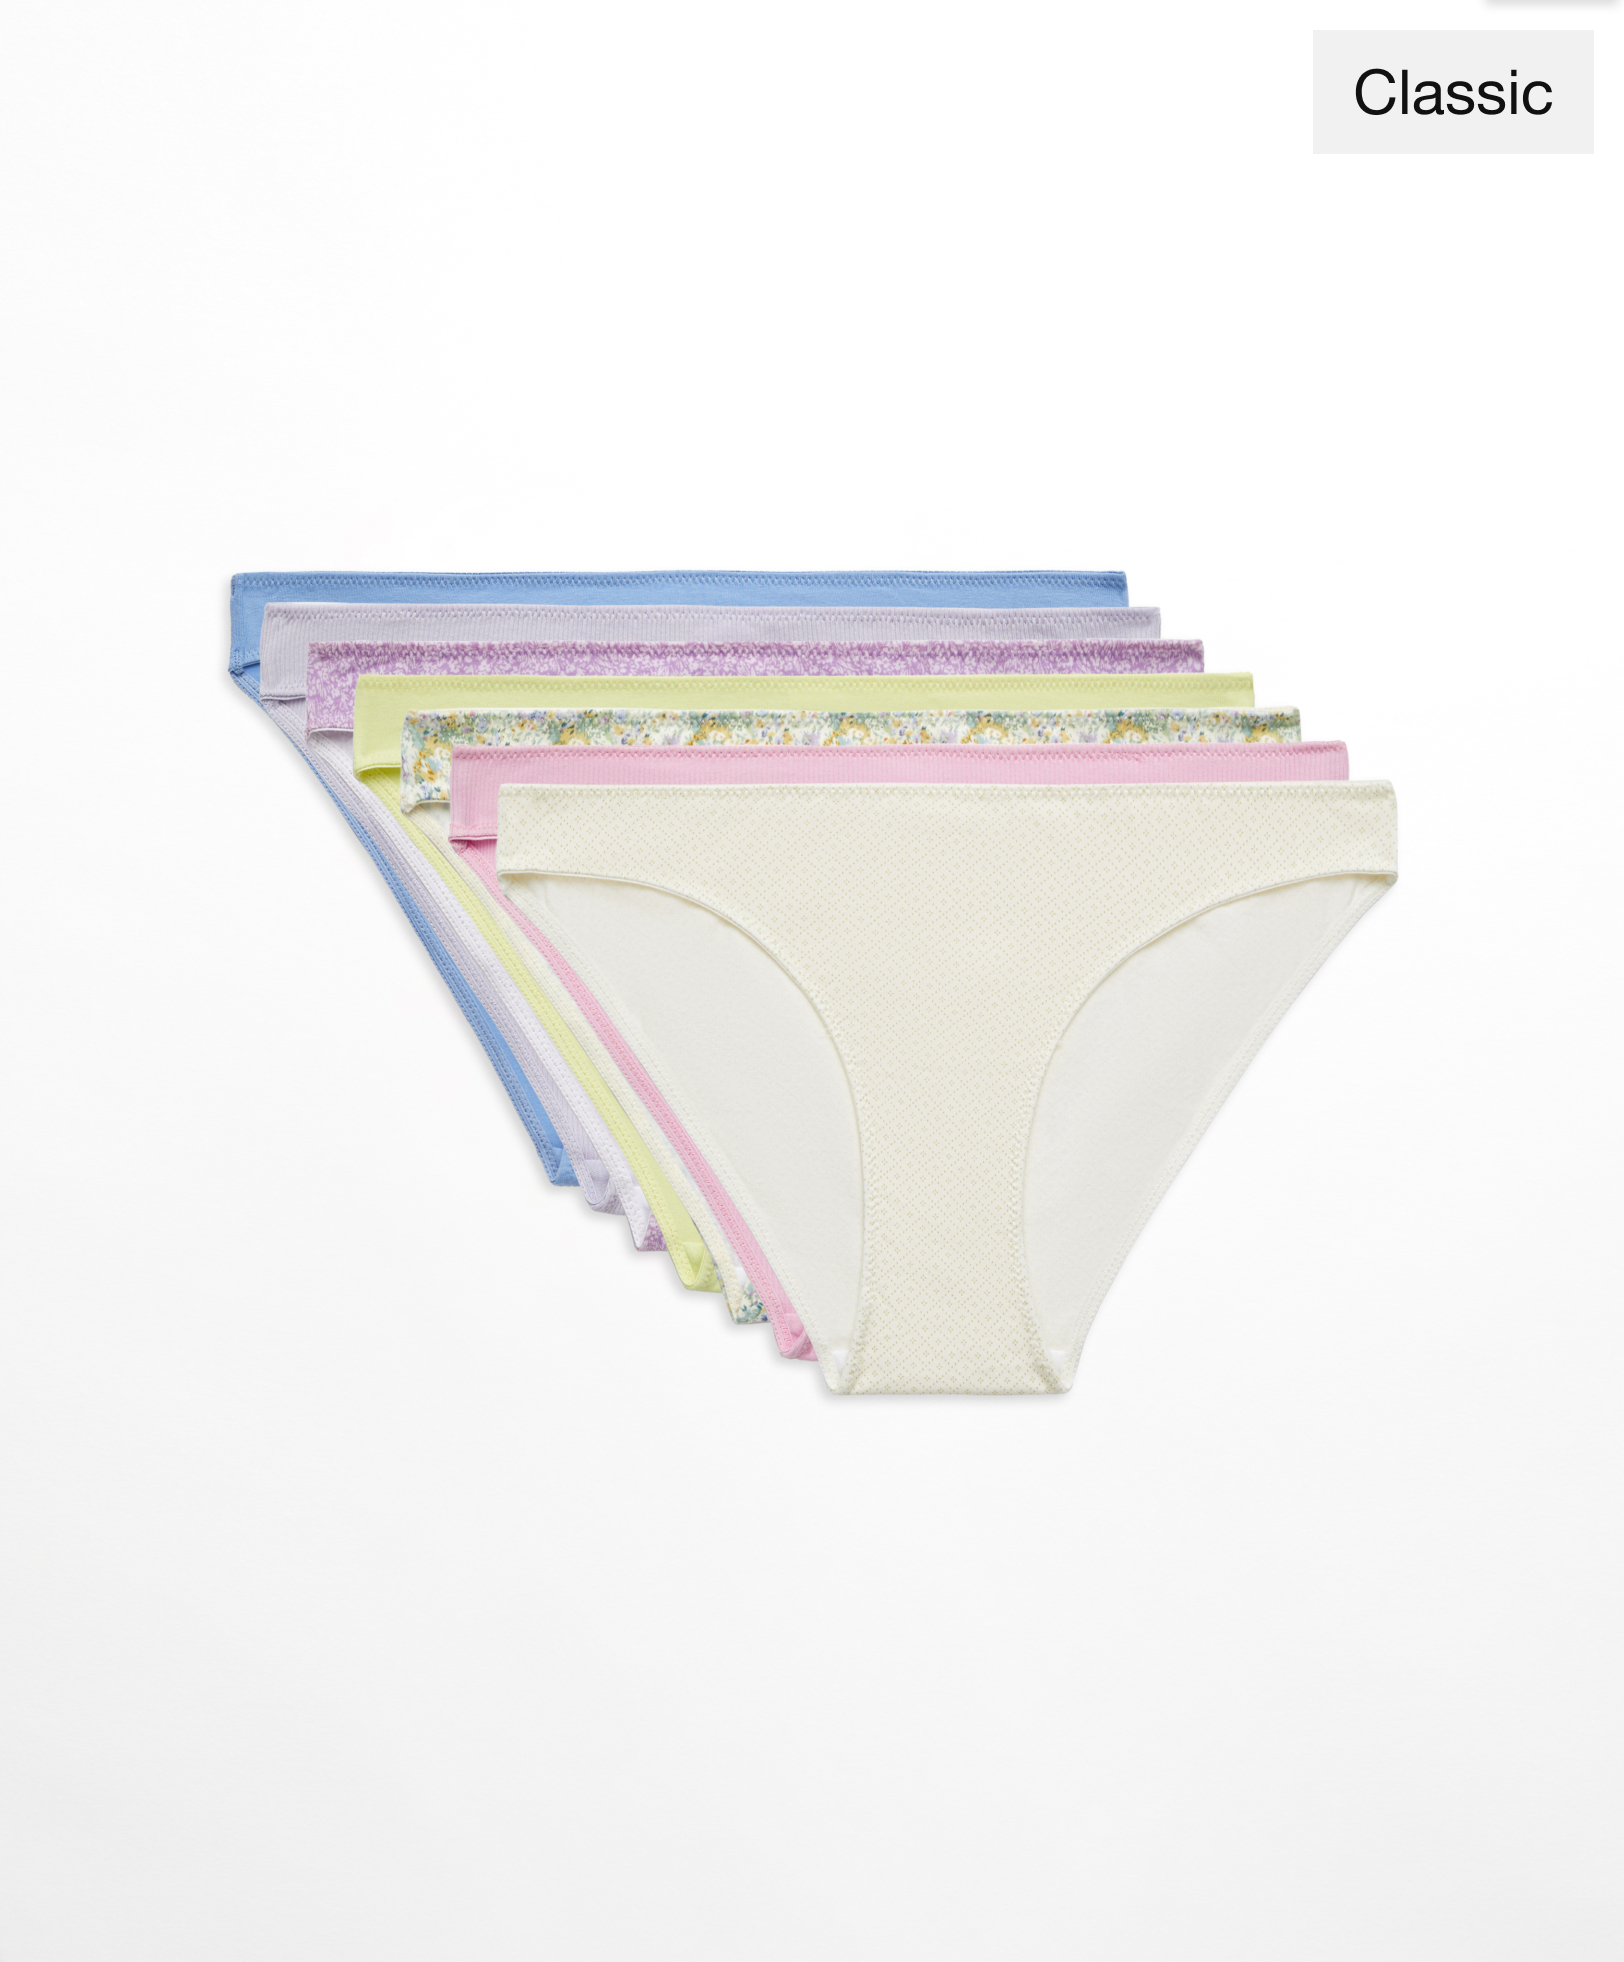 7 printed and textured cotton classic briefs